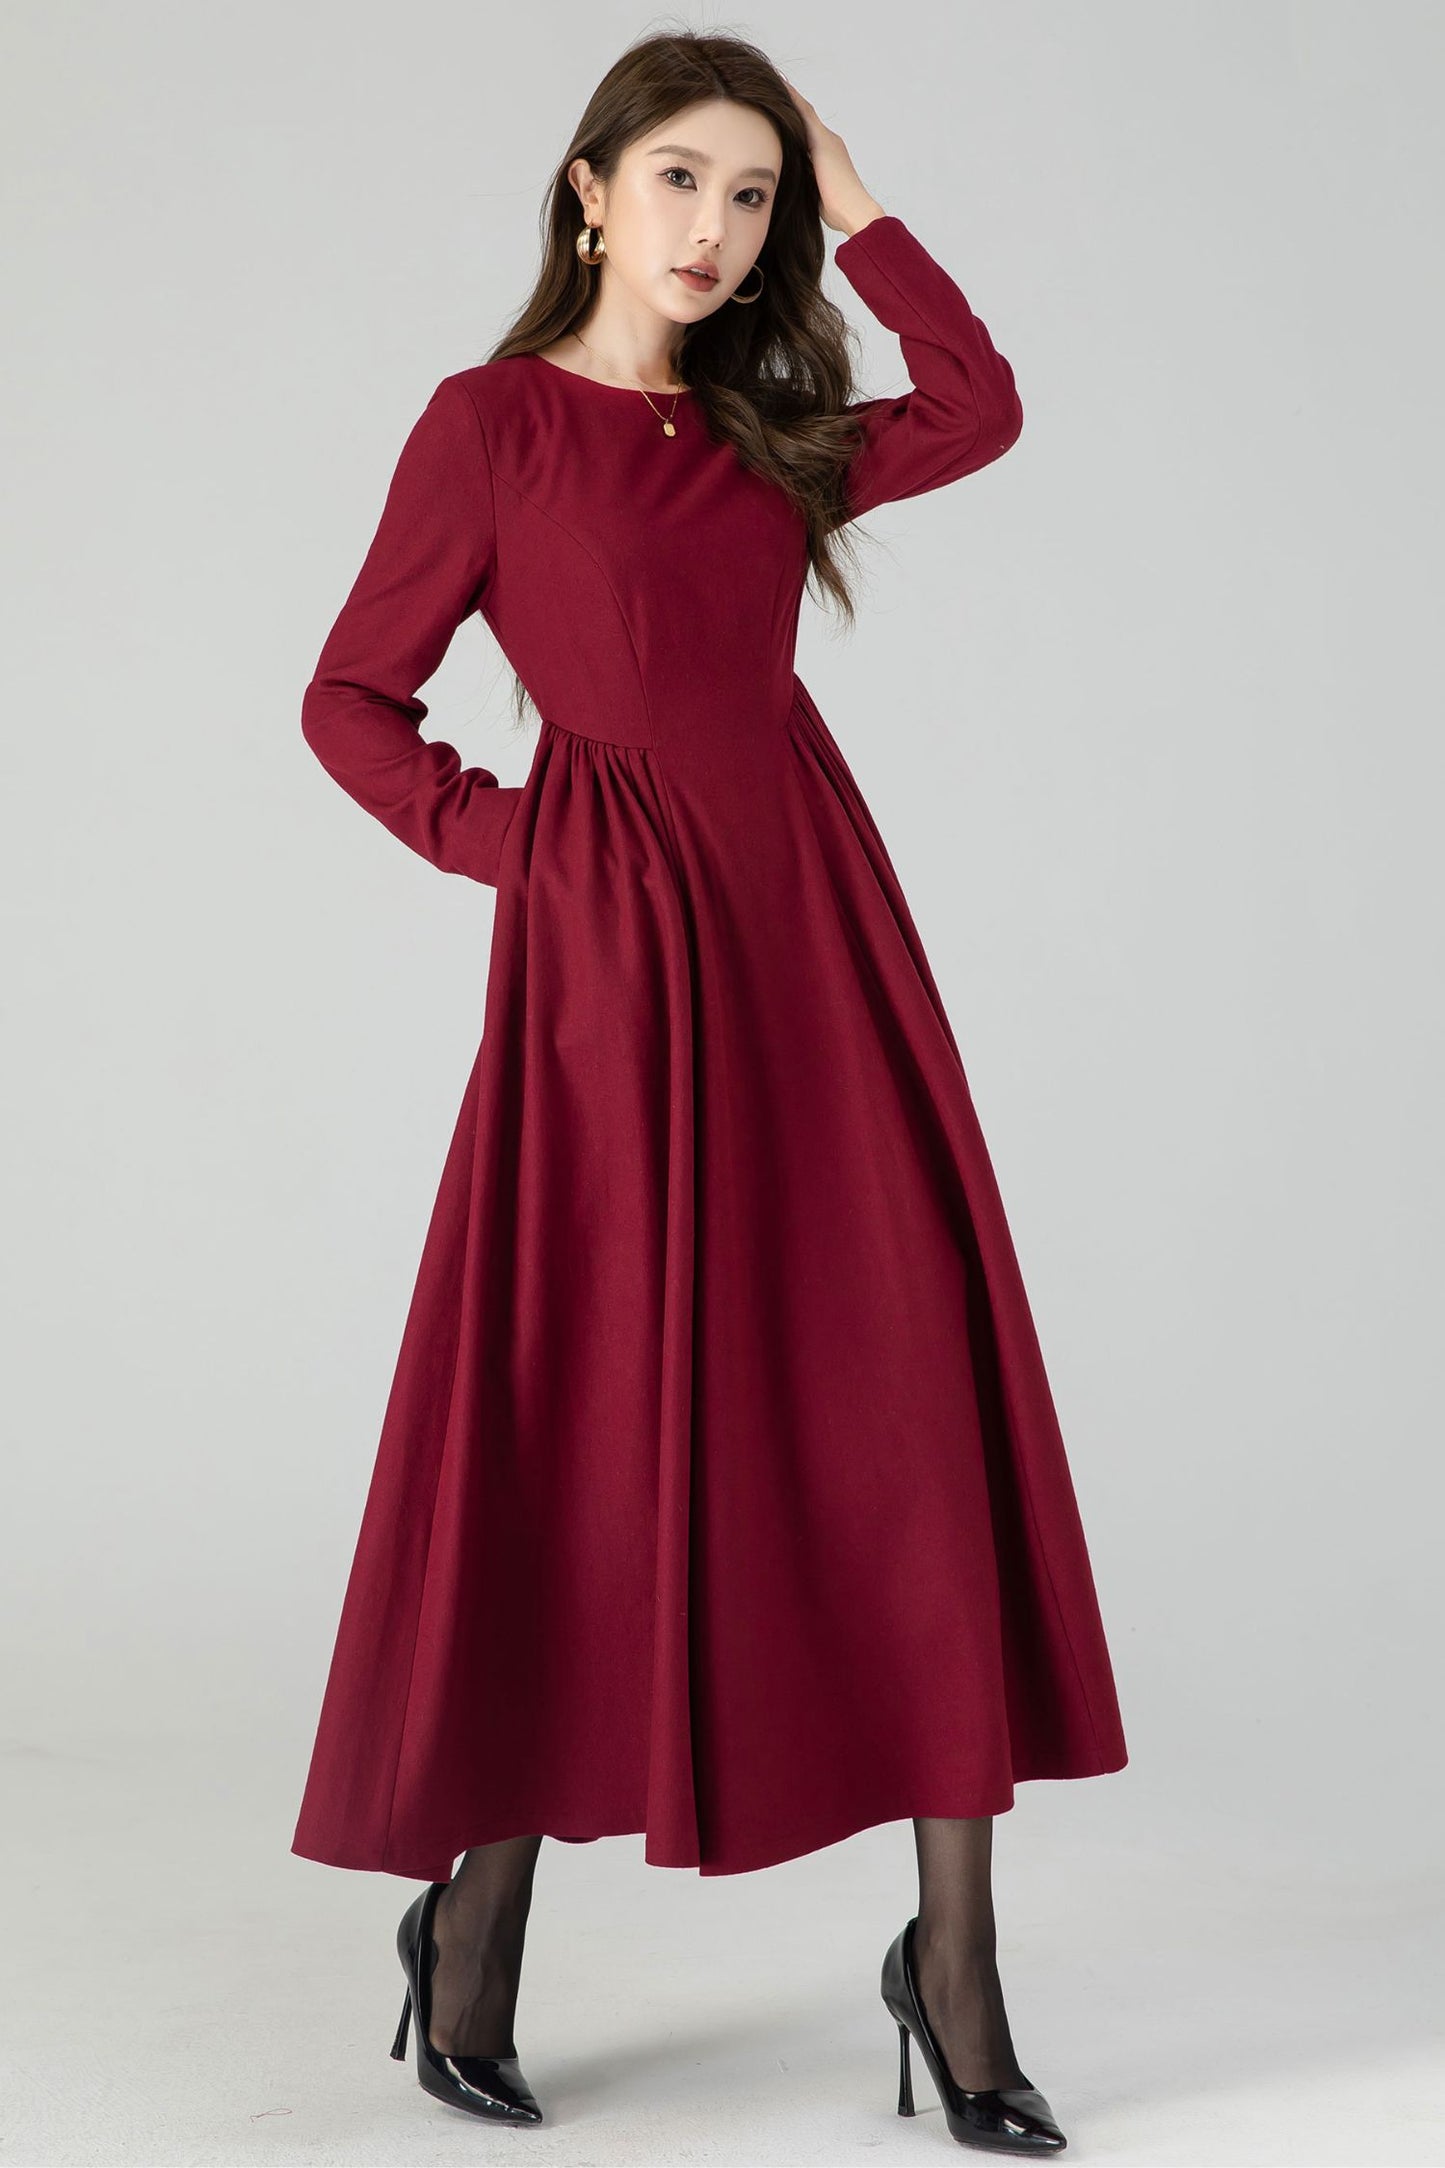 Fit and flare burgundy wool dress women 4545